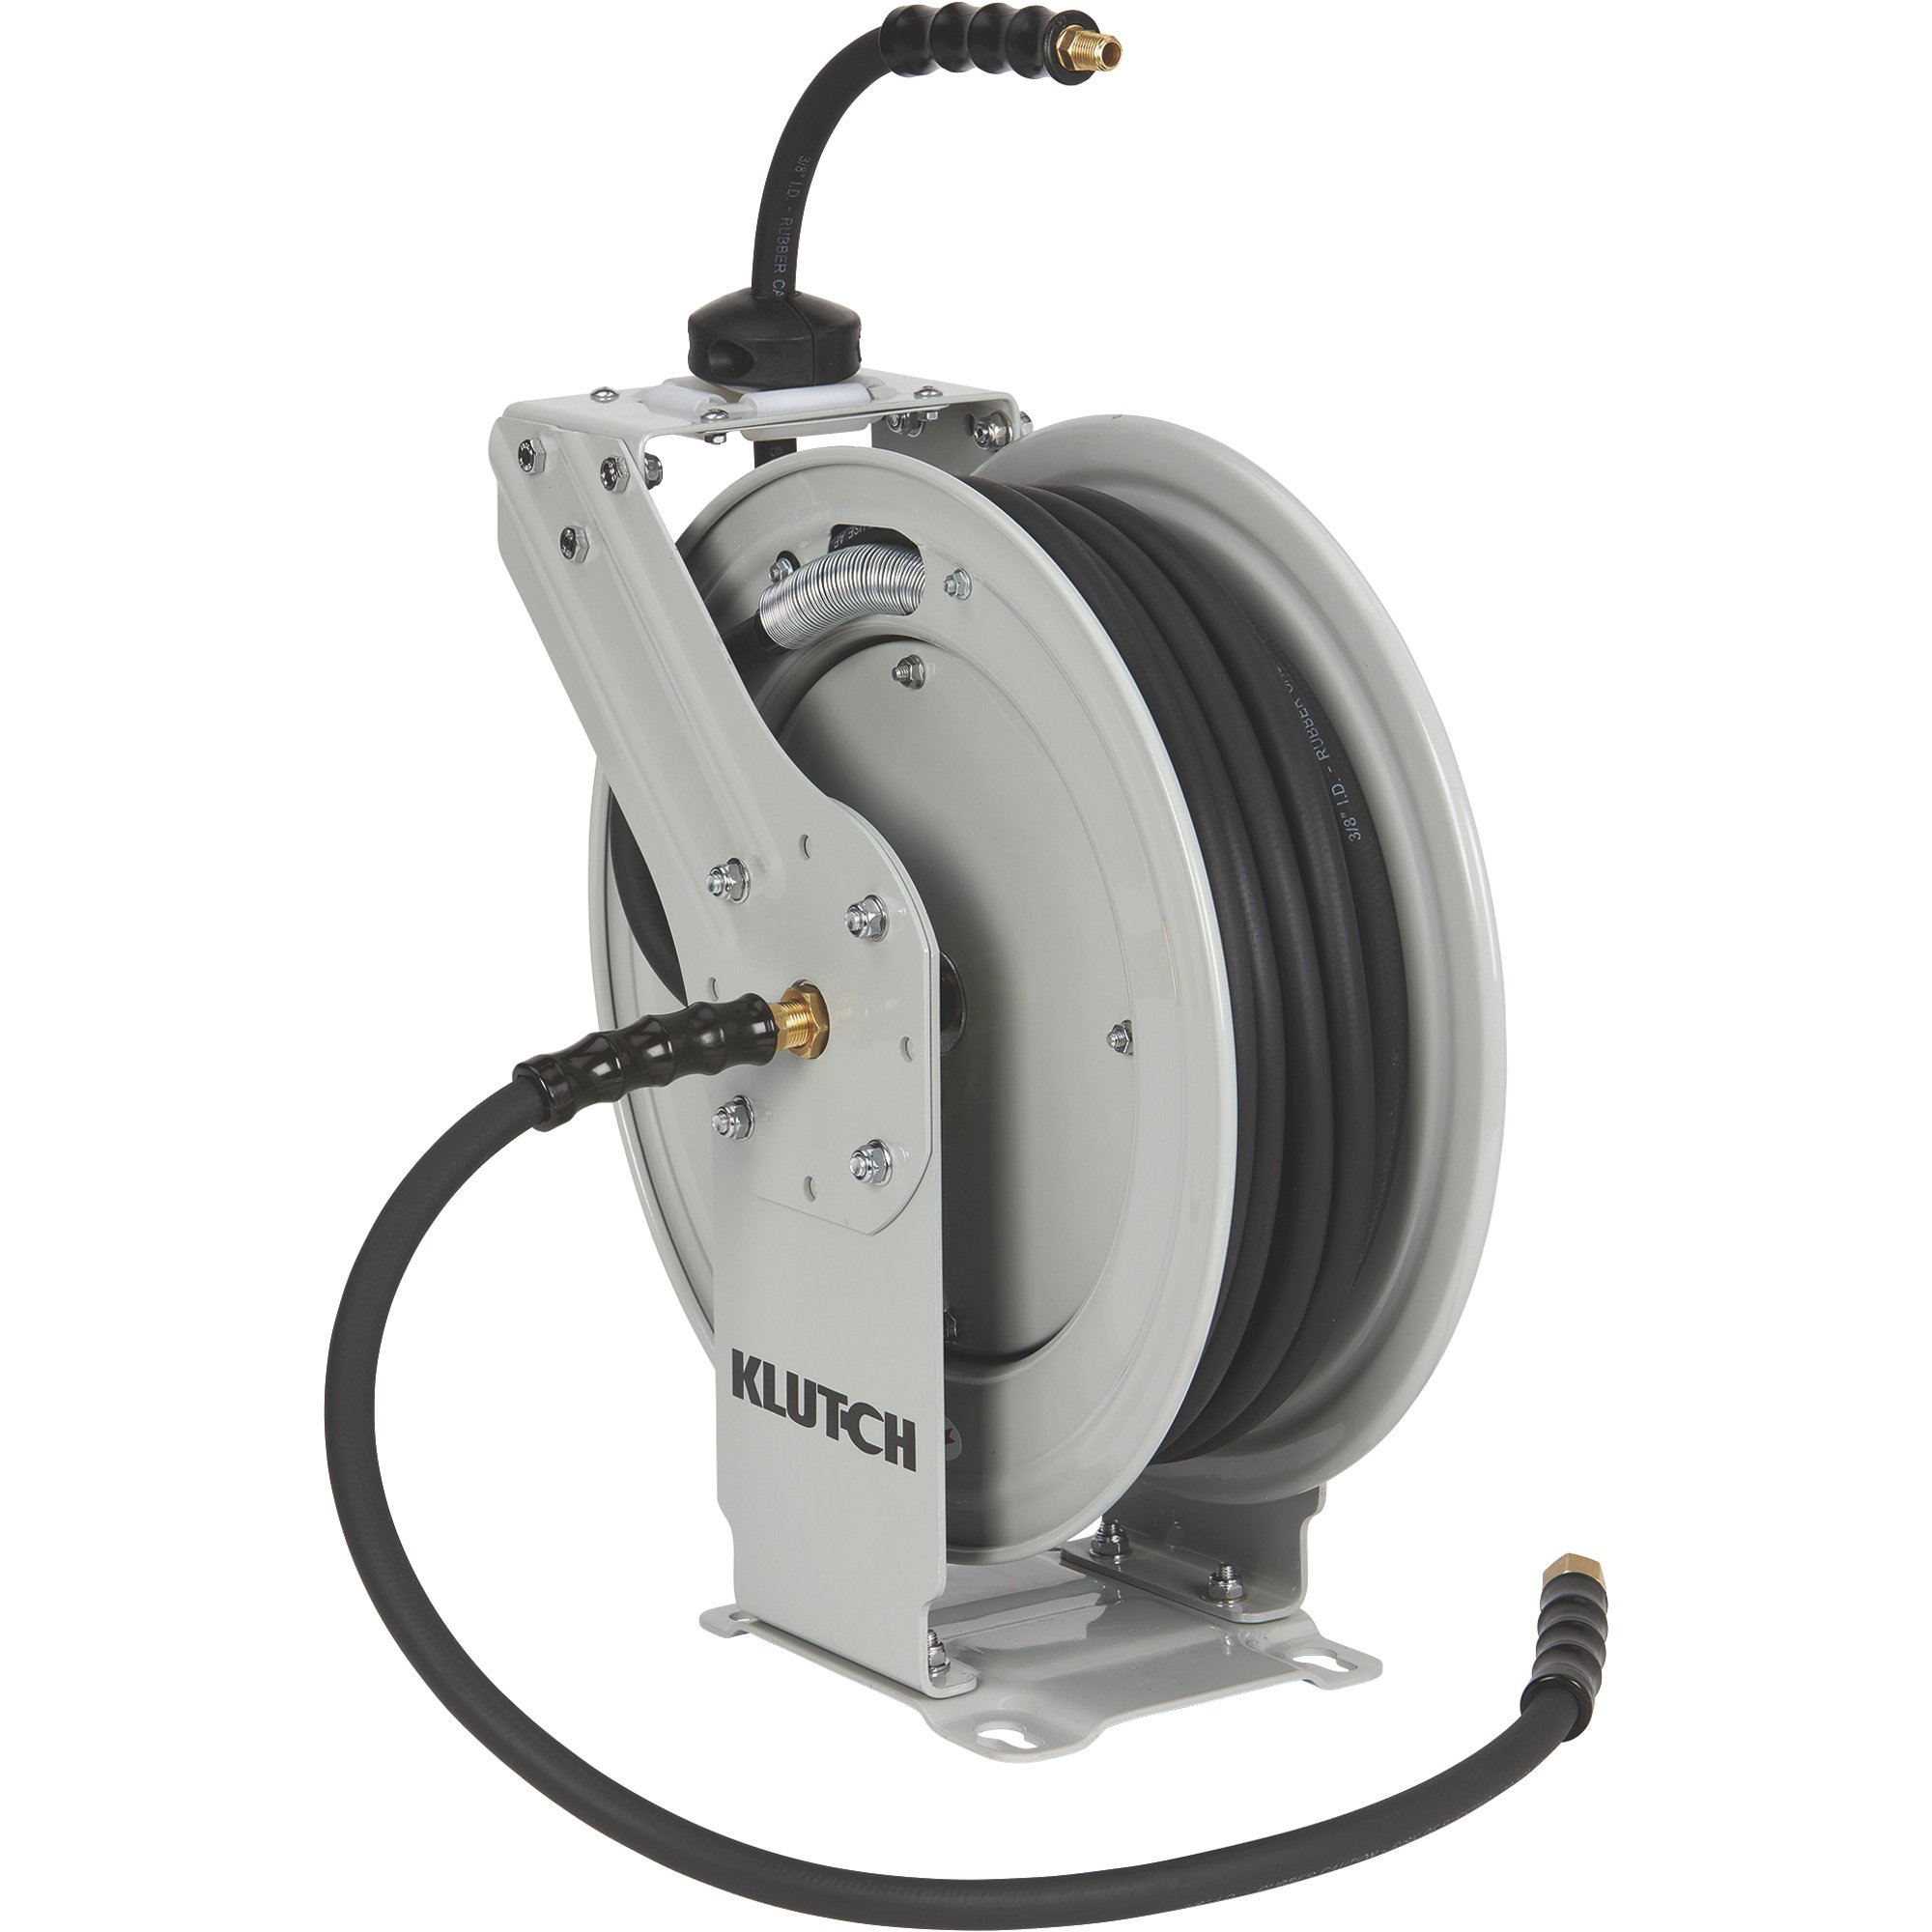 Klutch Auto Rewind Air Hose Reel, With 1/2in. x 50ft. Rubber Hose, 300 PSI